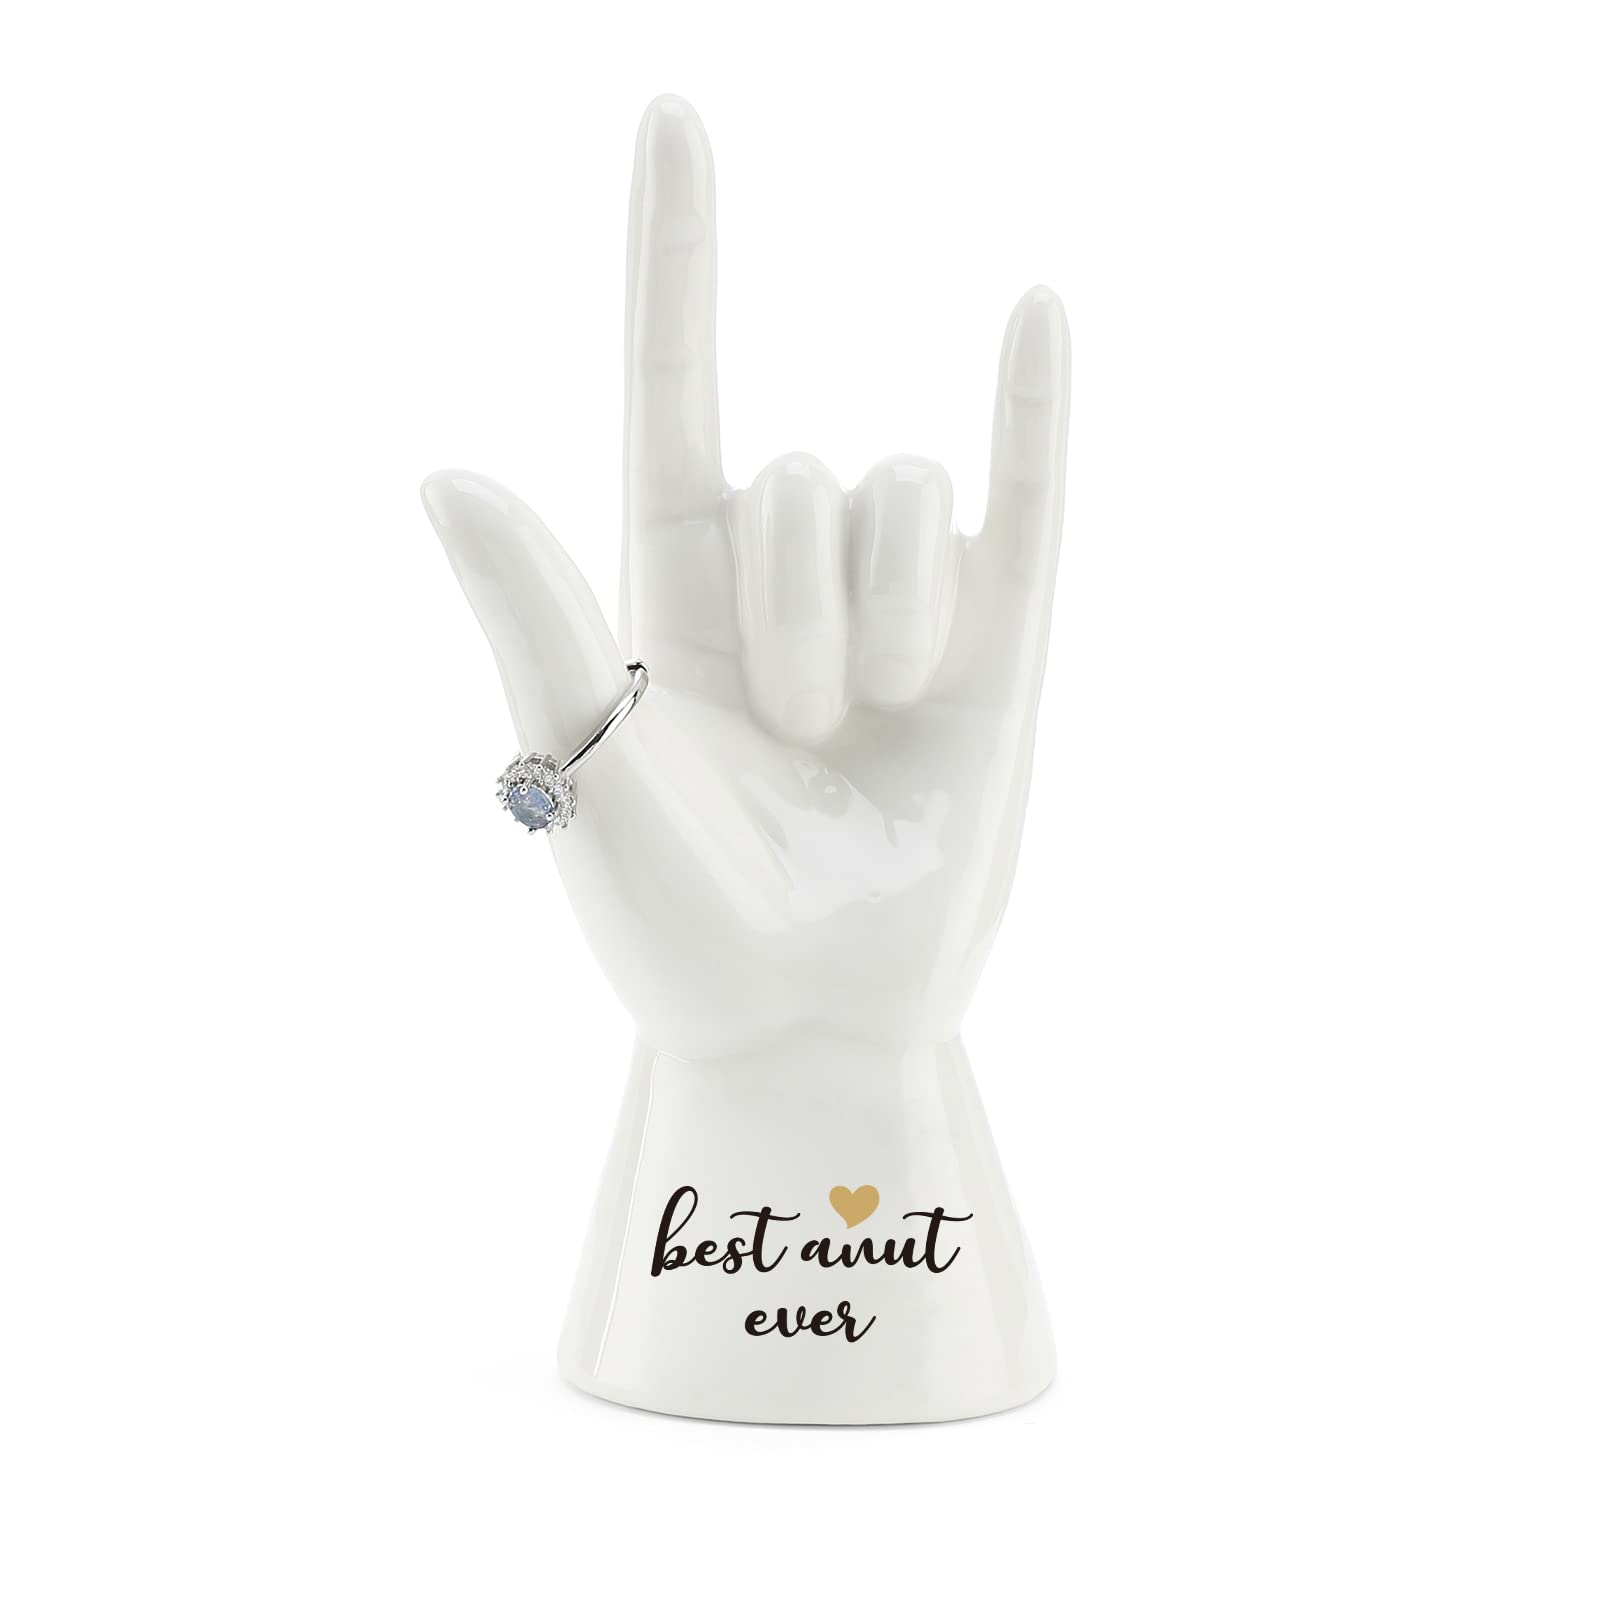 JOYIMARR Best Aunt Ever Gifts I love You Hand Sculpture Ring Holder Gifts For Aunt, Aunt Birthday Gifts From Niece, Jewelry Holder Stand Aunt Gifts From Nephew